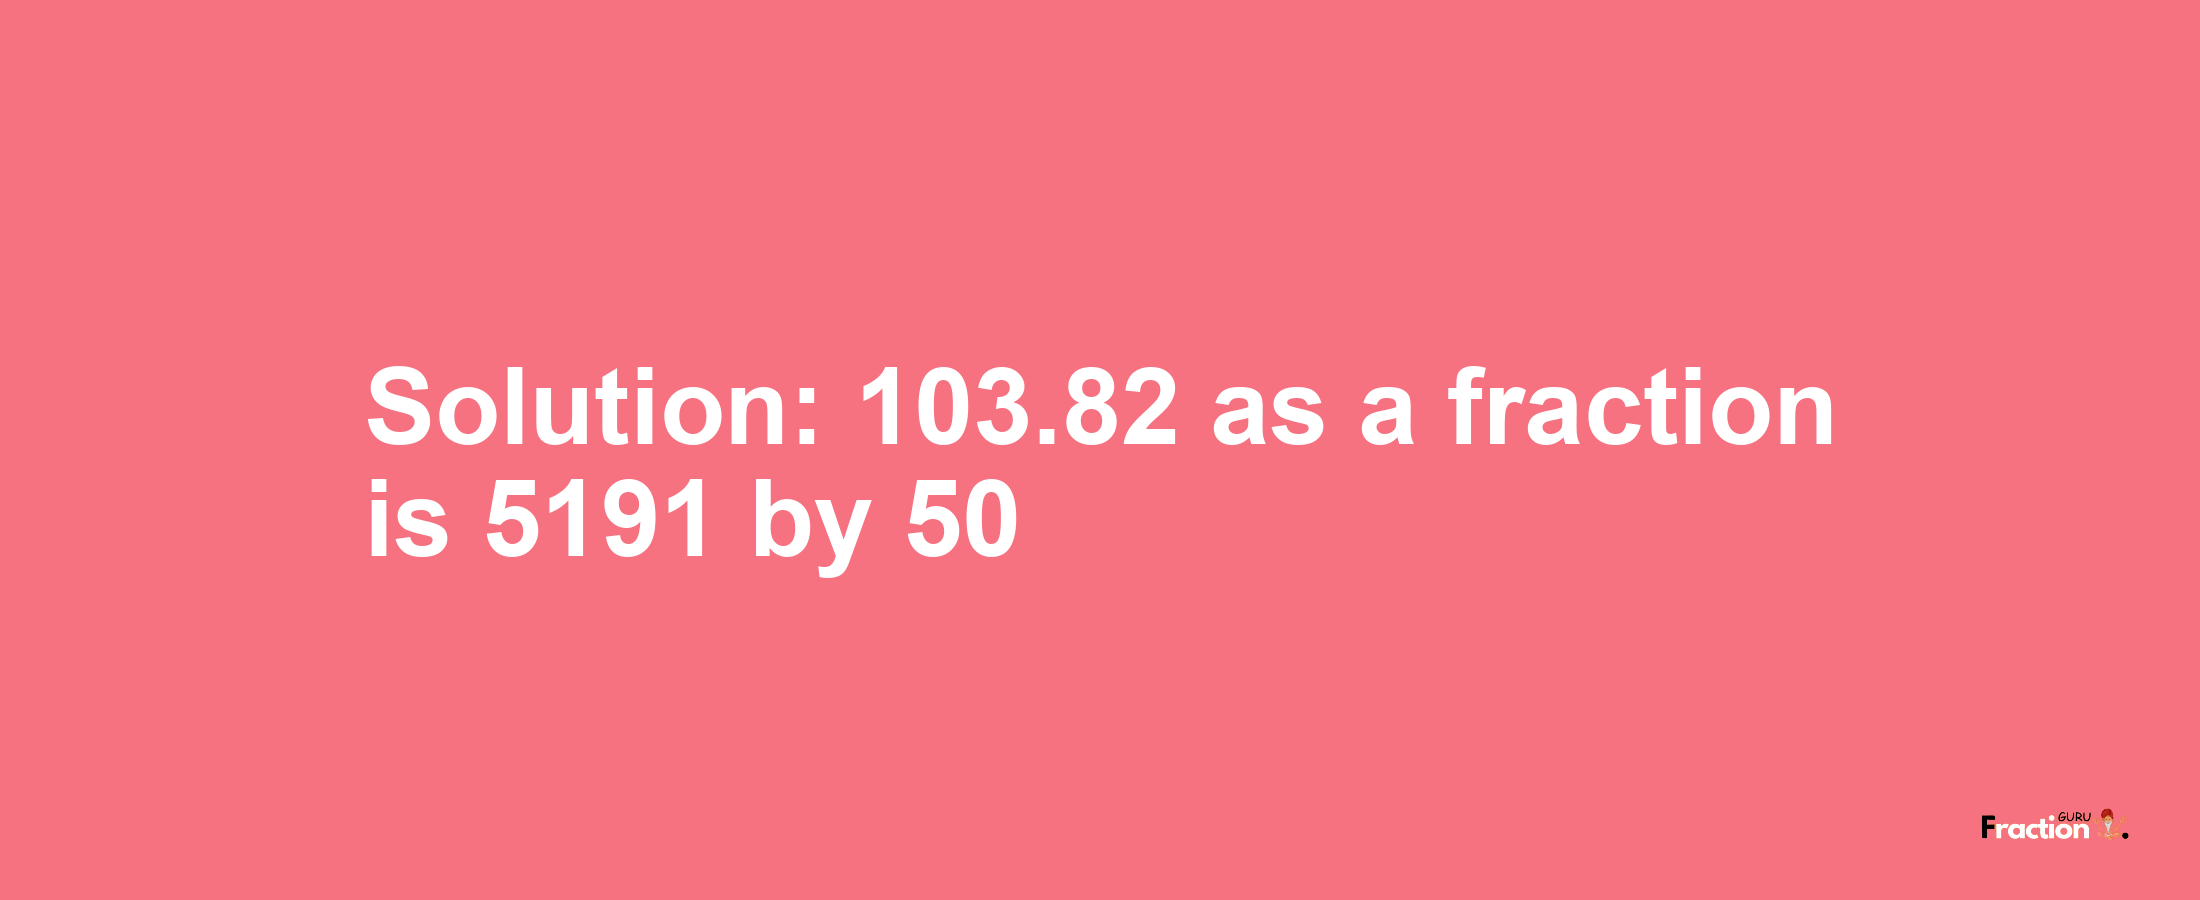 Solution:103.82 as a fraction is 5191/50